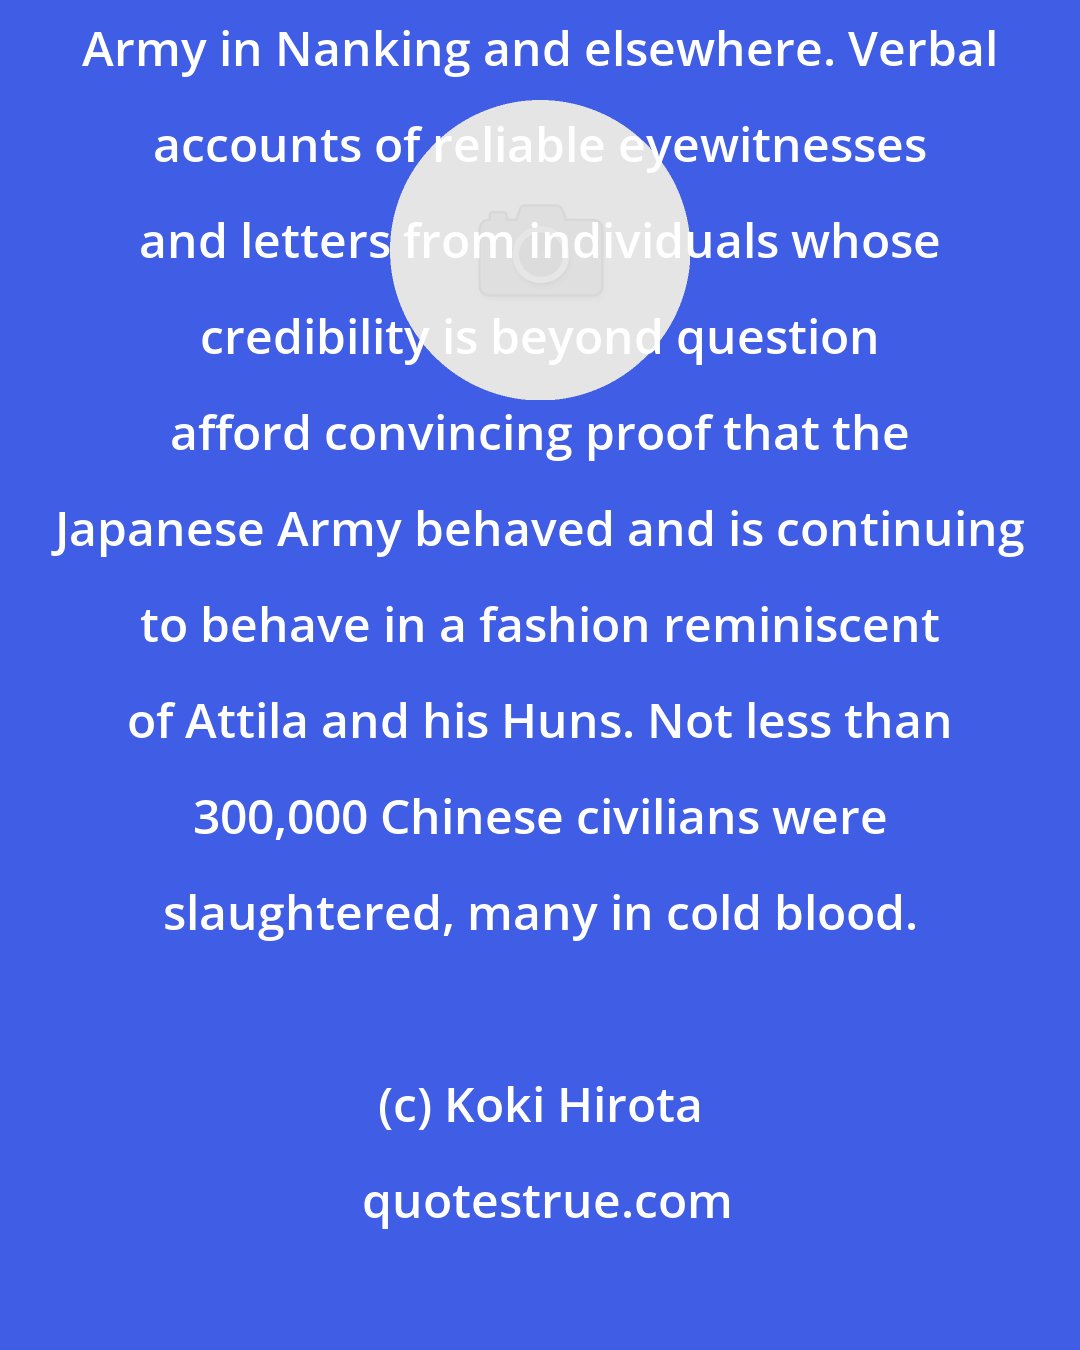 Koki Hirota: I investigated reported Japanese atrocities committed by the Japanese Army in Nanking and elsewhere. Verbal accounts of reliable eyewitnesses and letters from individuals whose credibility is beyond question afford convincing proof that the Japanese Army behaved and is continuing to behave in a fashion reminiscent of Attila and his Huns. Not less than 300,000 Chinese civilians were slaughtered, many in cold blood.